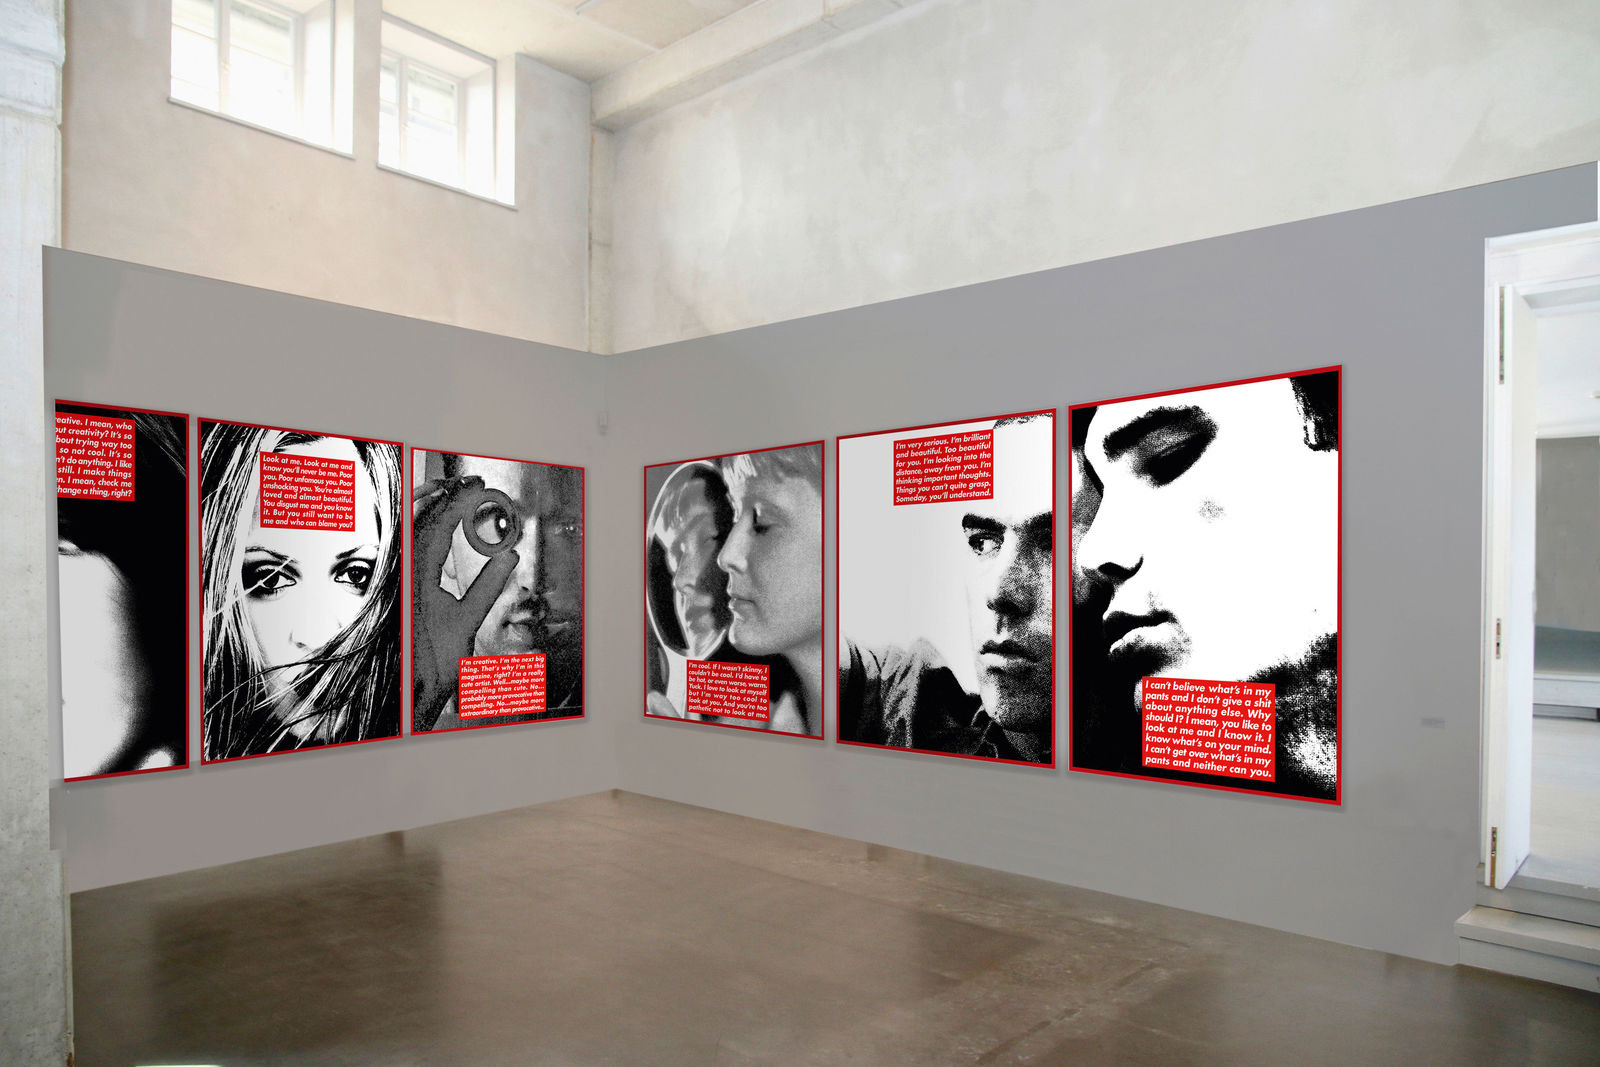 Volkswagen supports exhibition marking the presentation of the renowned art award “Kaiserring Goslar” to Barbara Kruger